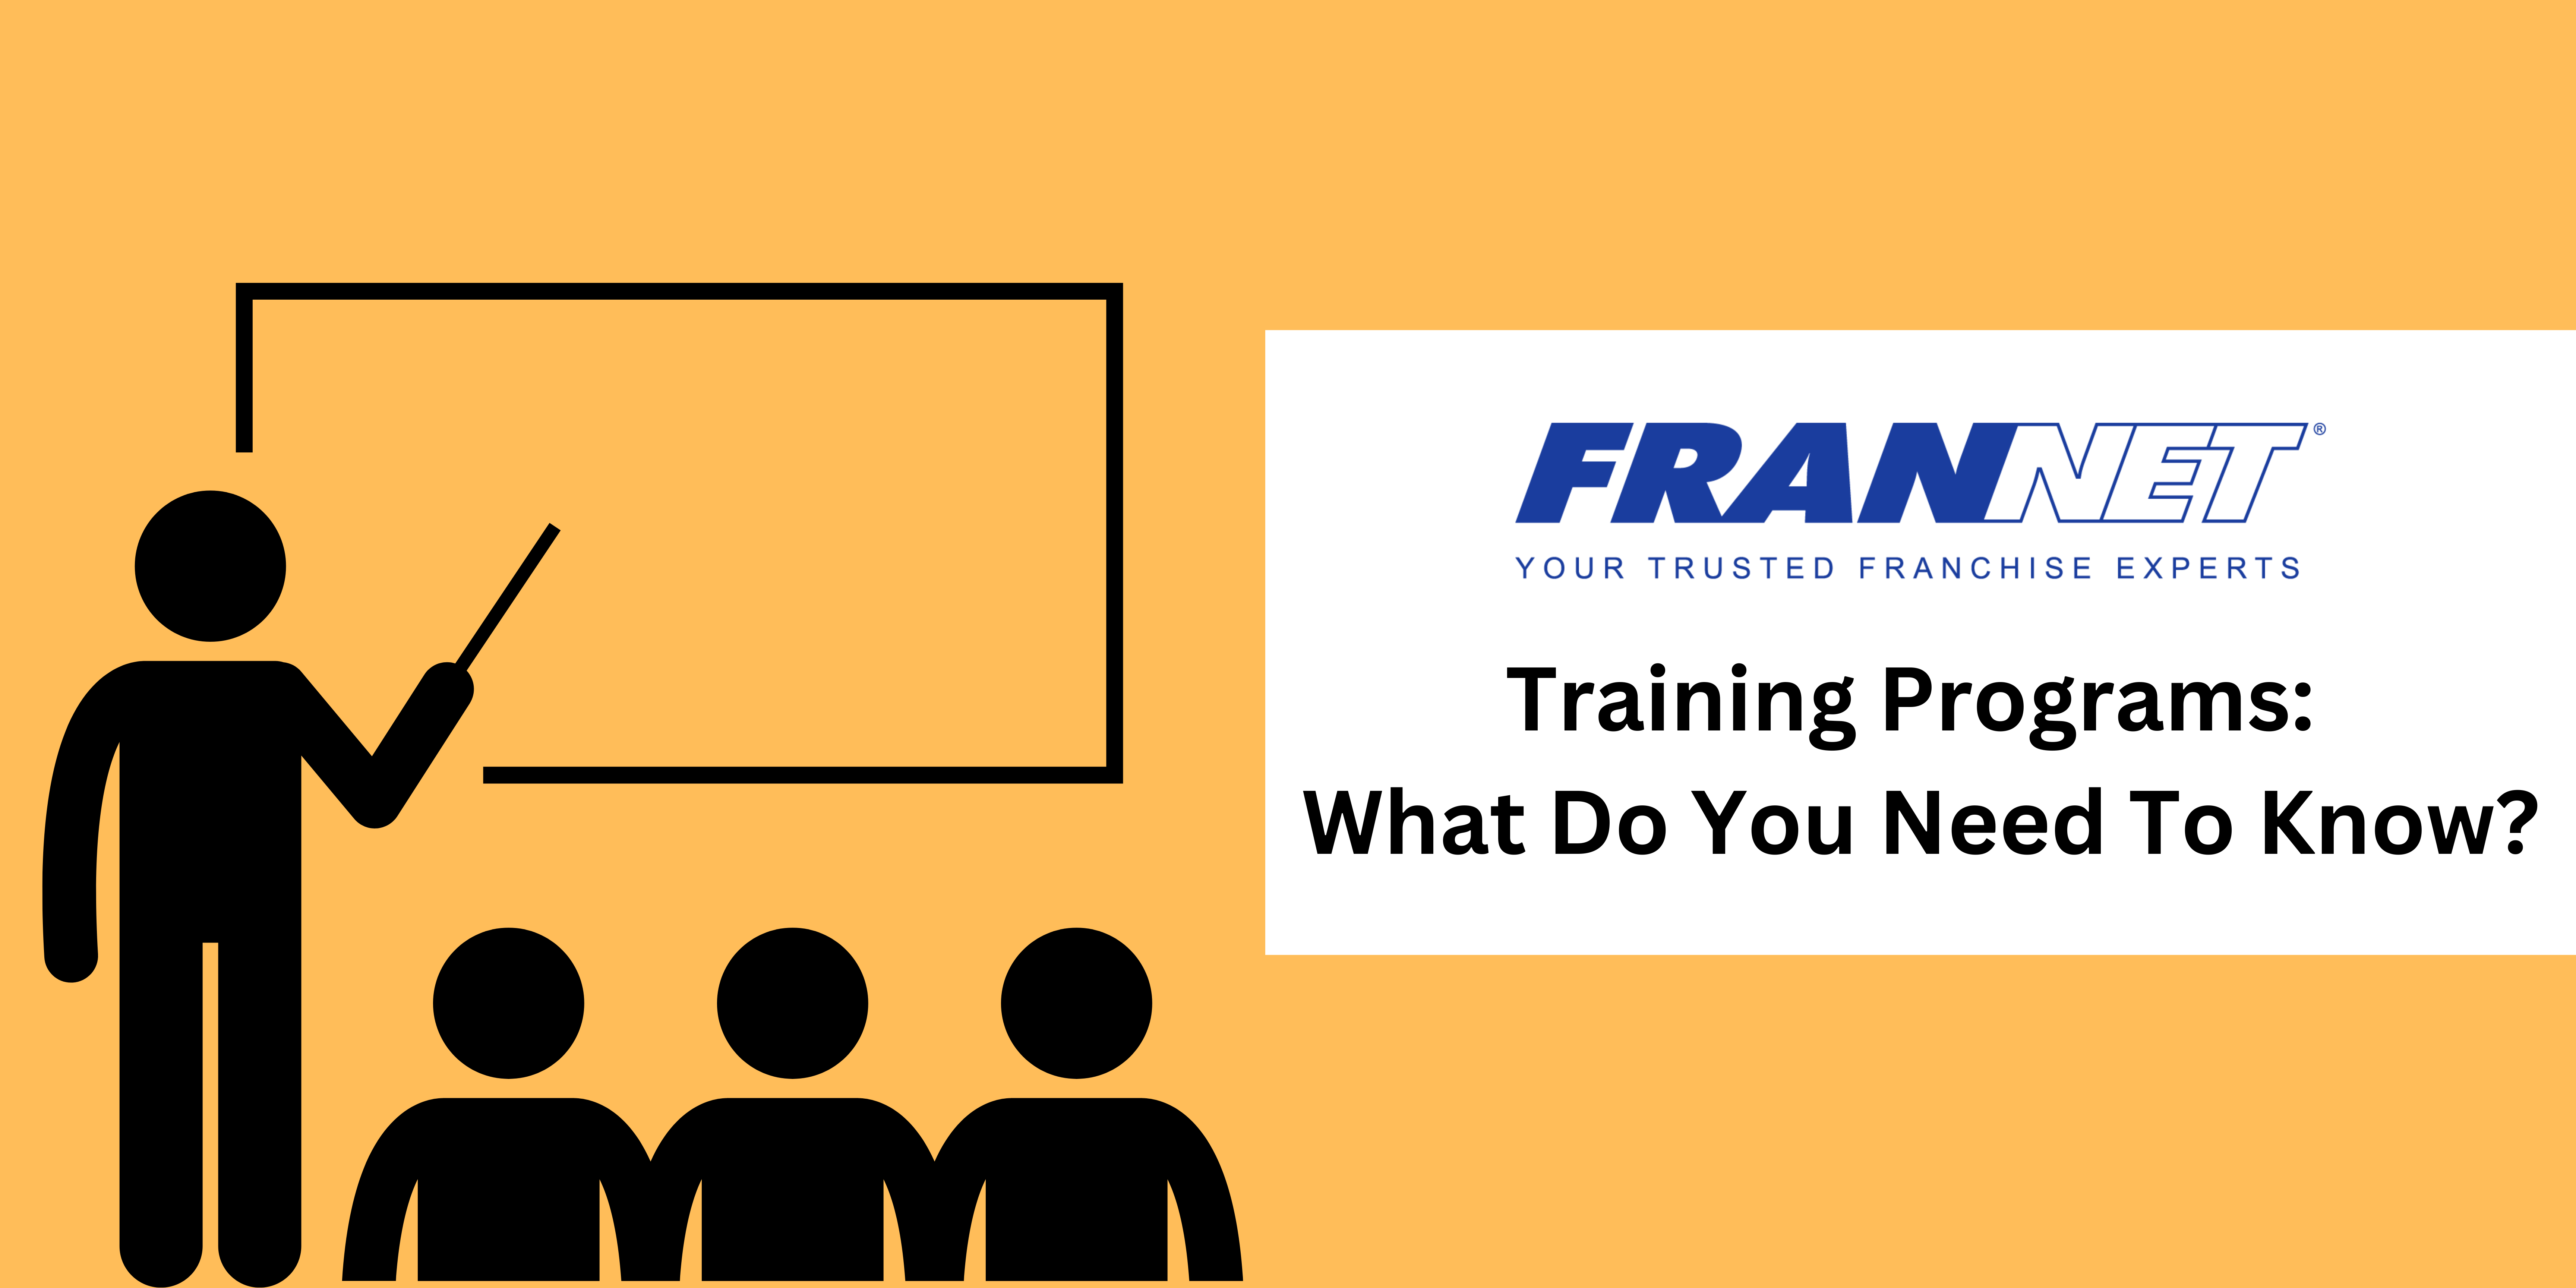 Franchise Training: What Do You Need To Know?